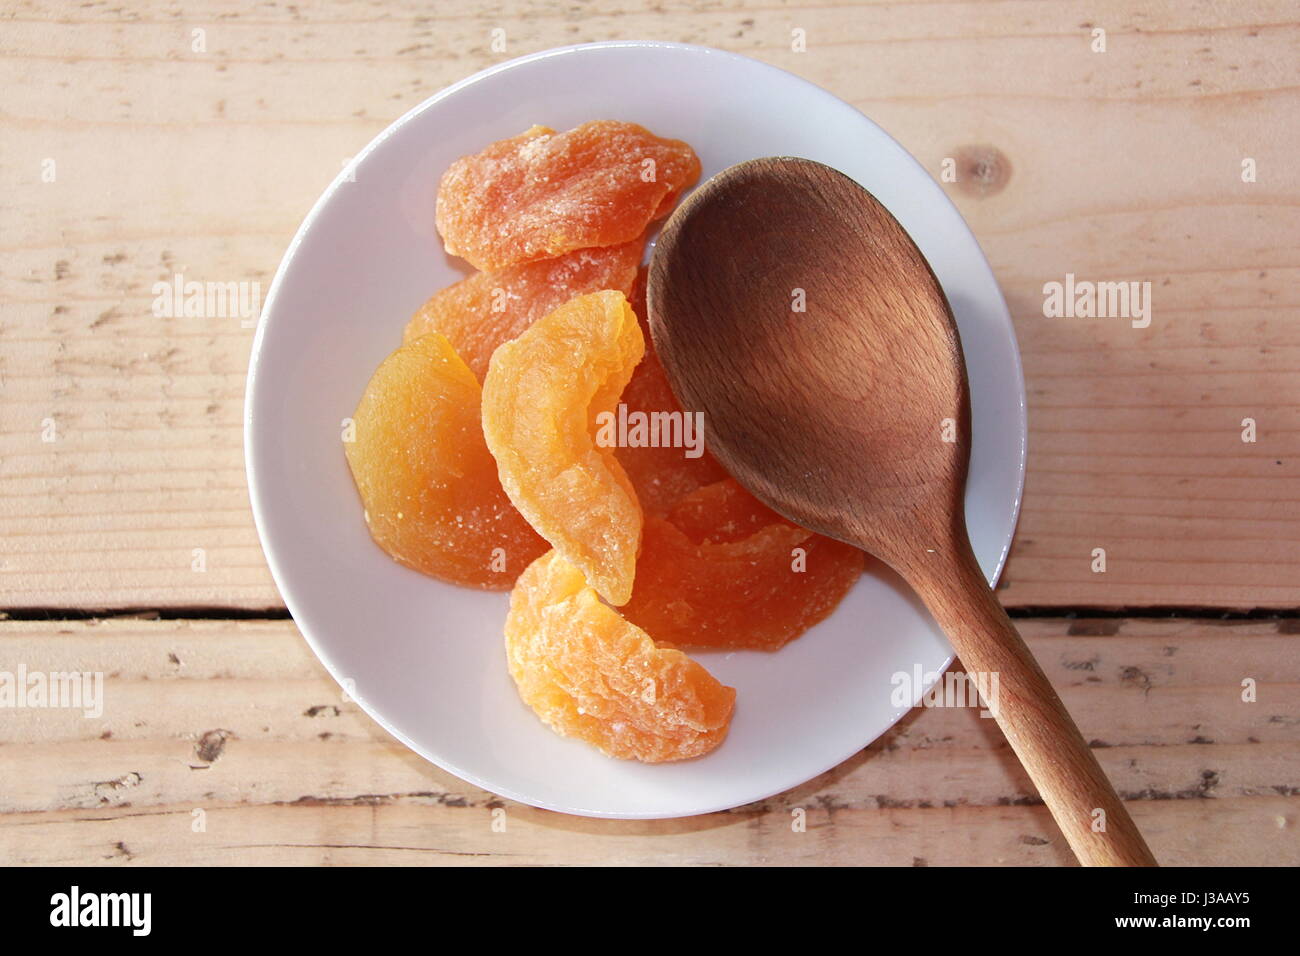 Dried fruits and nuts Stock Photo